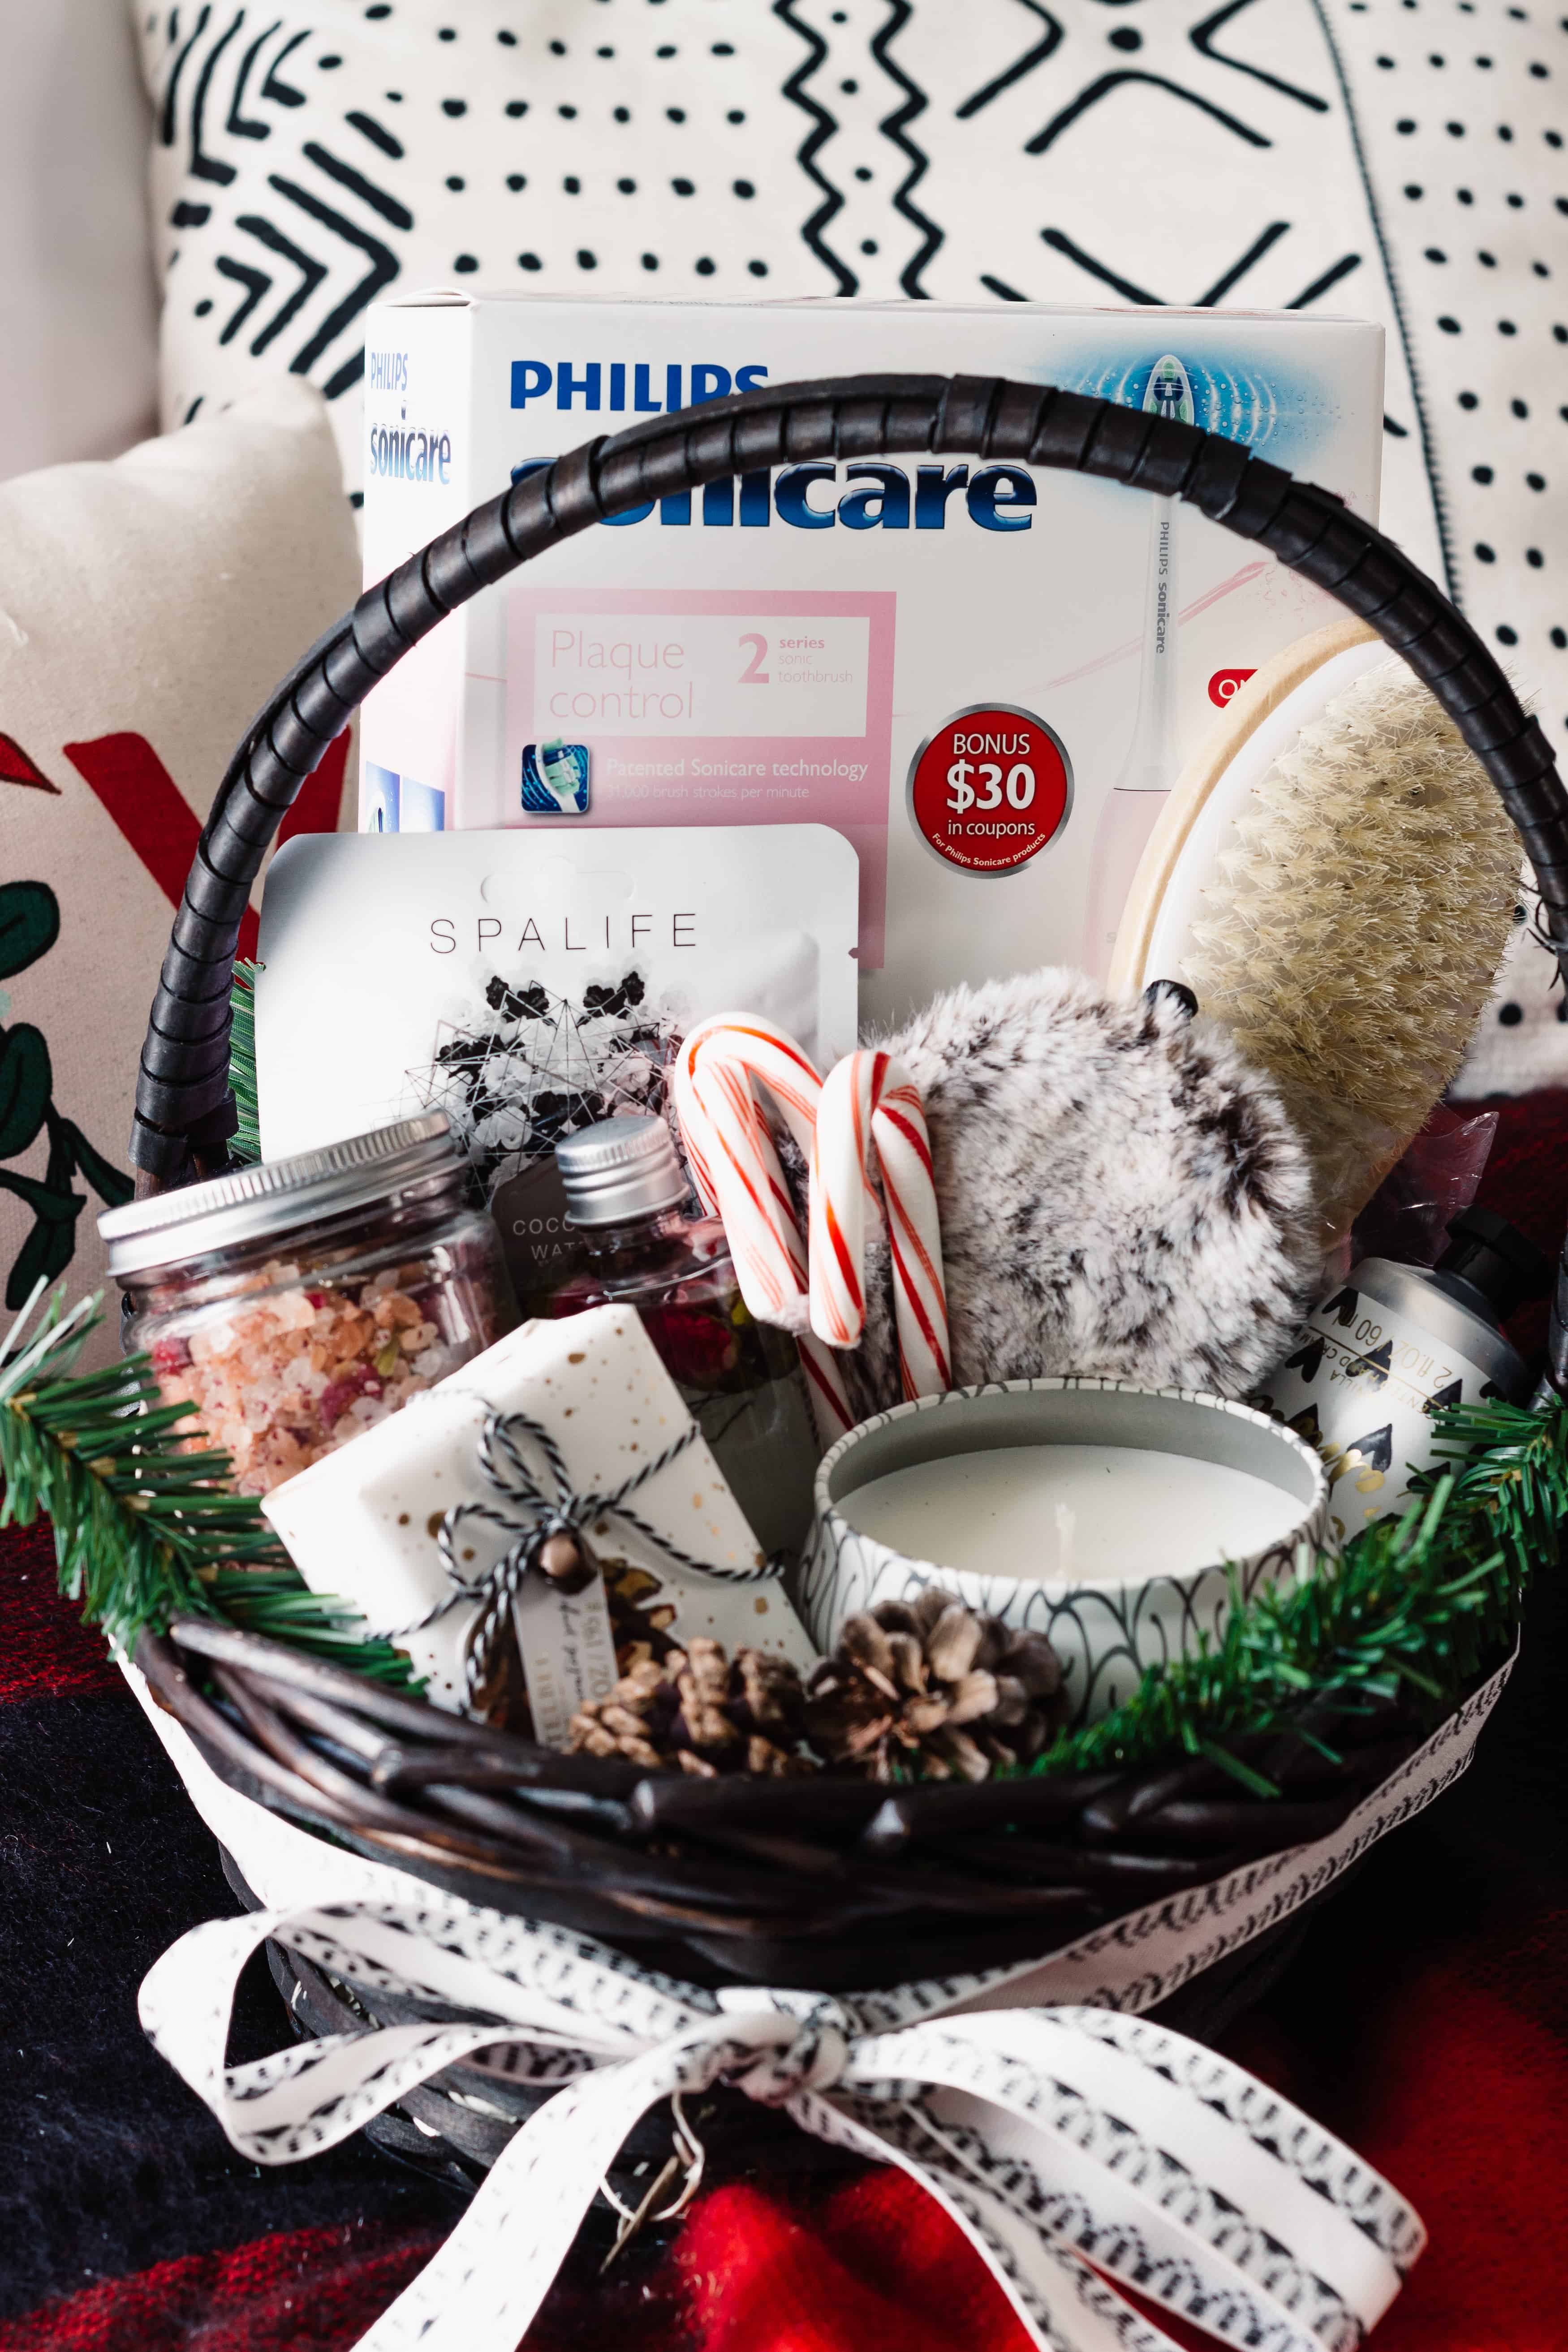 Gift For Mom: DIY Winter Beauty Gift Set. The perfect Christmas gift for mom! - Hot Beauty Health #ad #giftguide #giftsformom #beautygifts #PhilipsSonicare @PhilipsSonicare